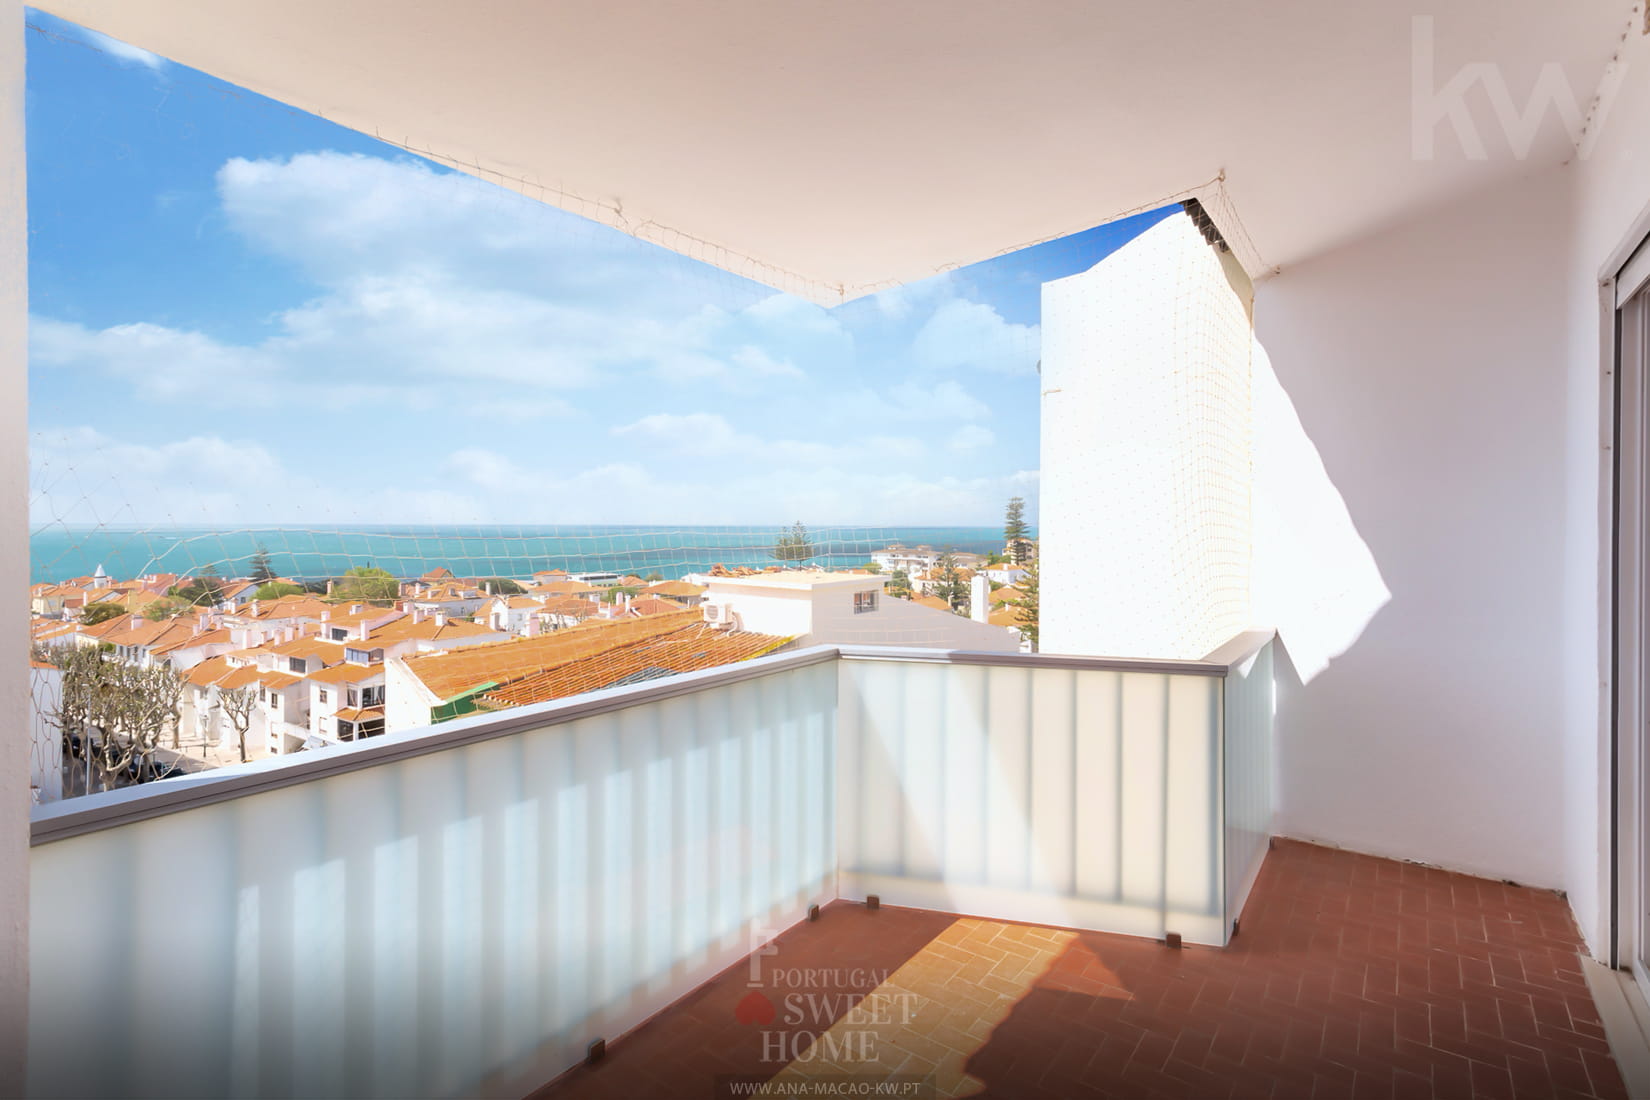 Balcony (7.13 m2) of the Room, with sea view